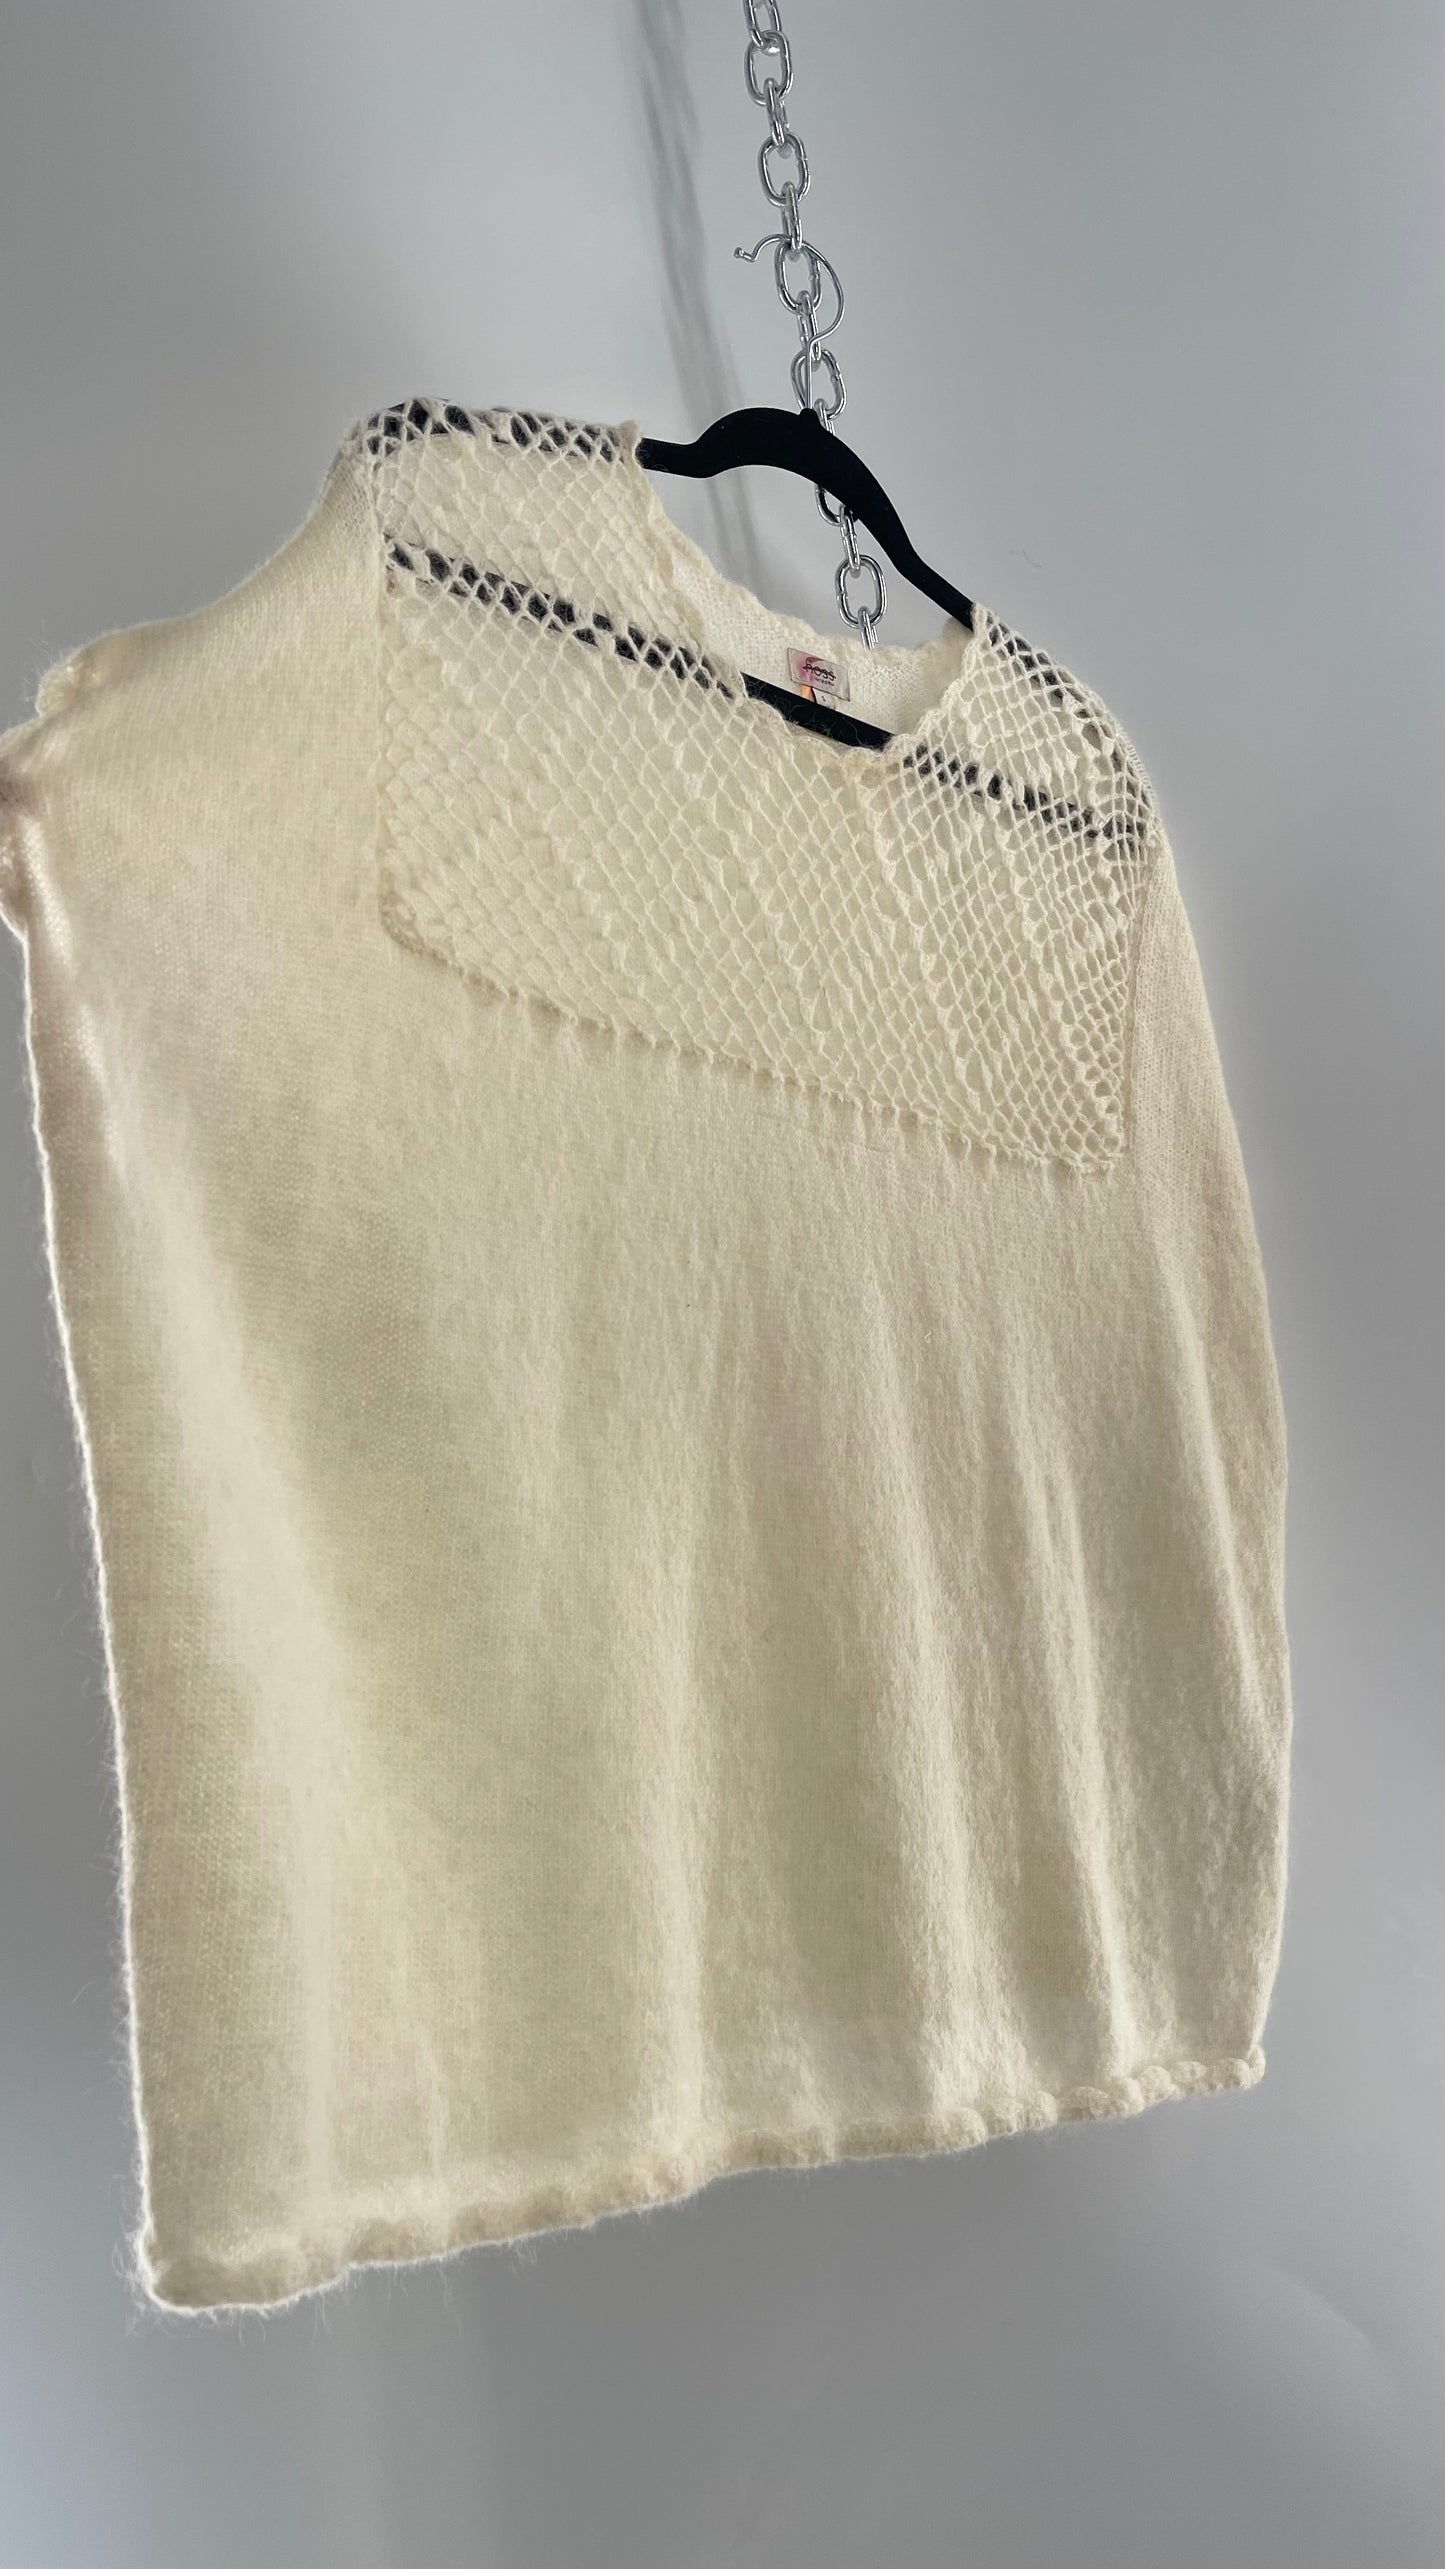 hoss intropia Cream Off White Knit Slouchy Sweater Vest with Netted Bust 30% Wool 25% Mohair Anthropologie (Small)